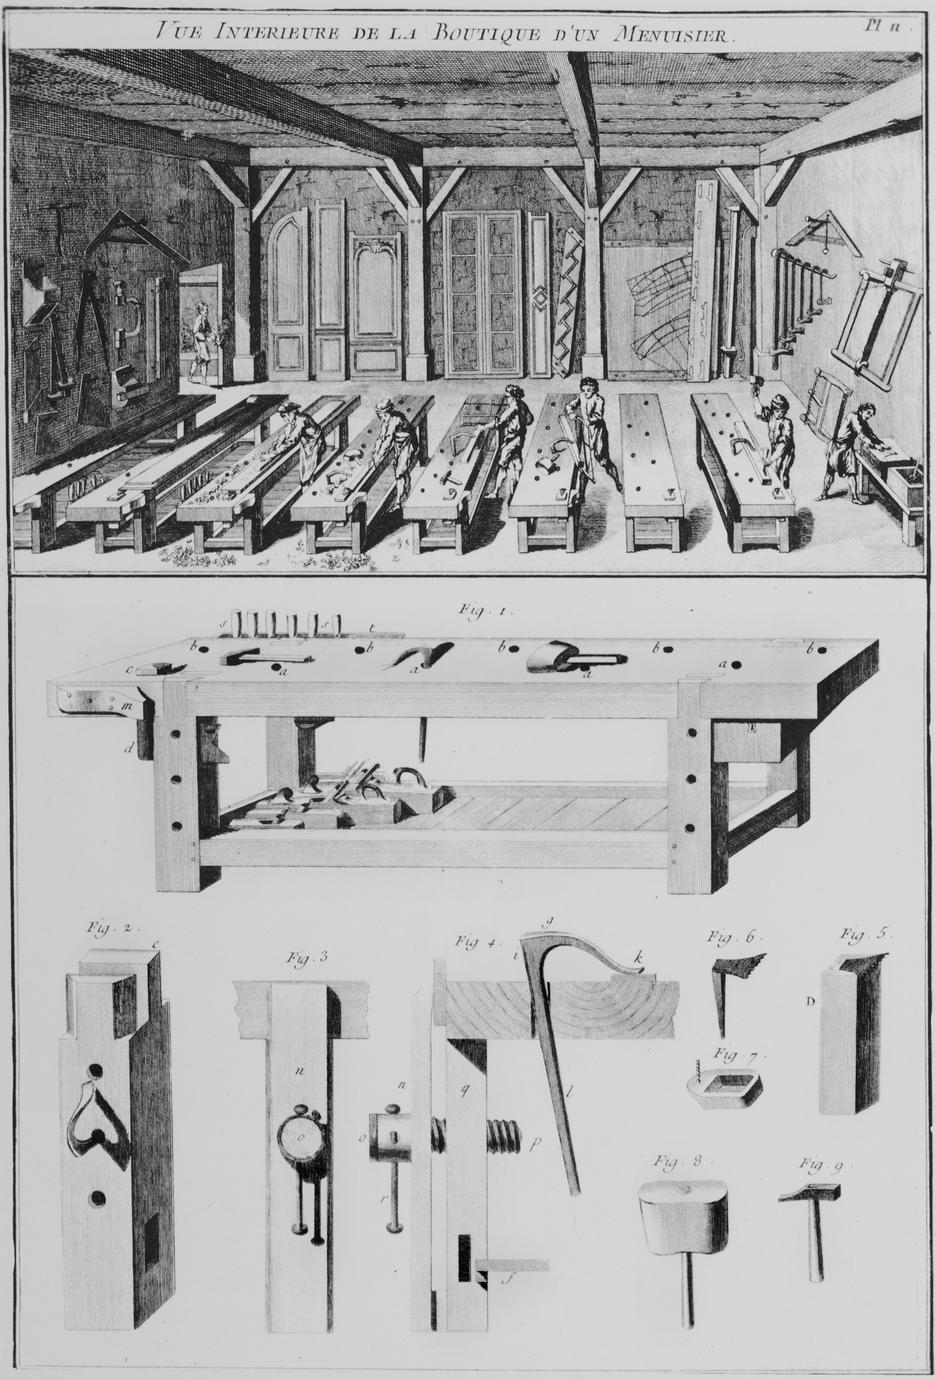 Print detailing the interior view of a woodworker's shop in the top portion, and the bottom portion showing various carpenter's benches and tools